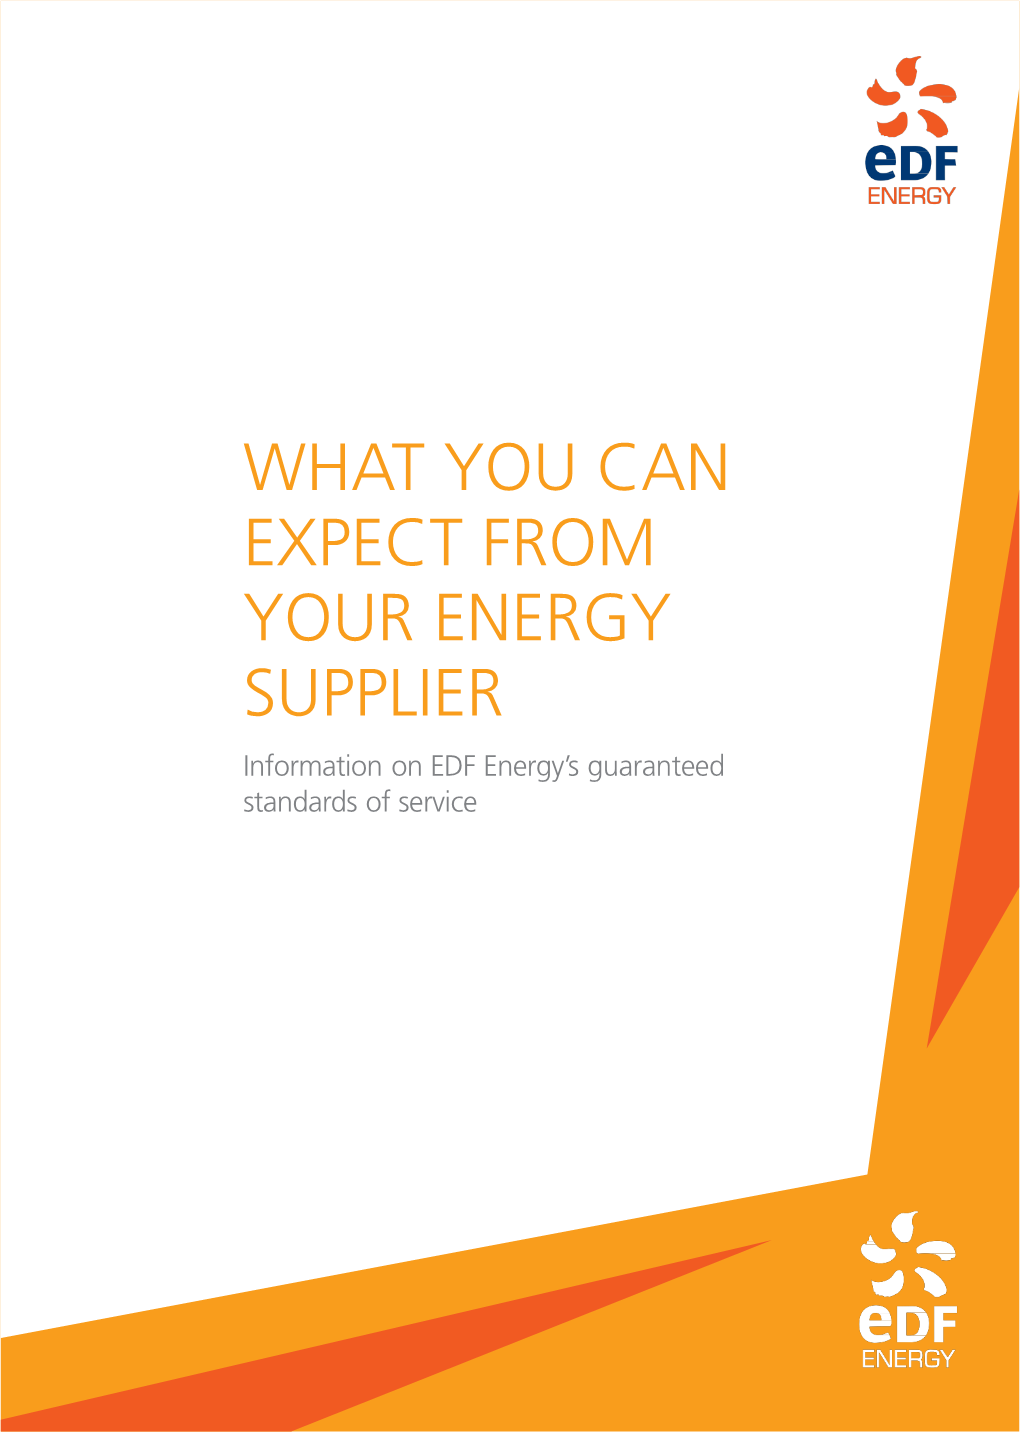 What You Can Expect from Your Energy Supplier